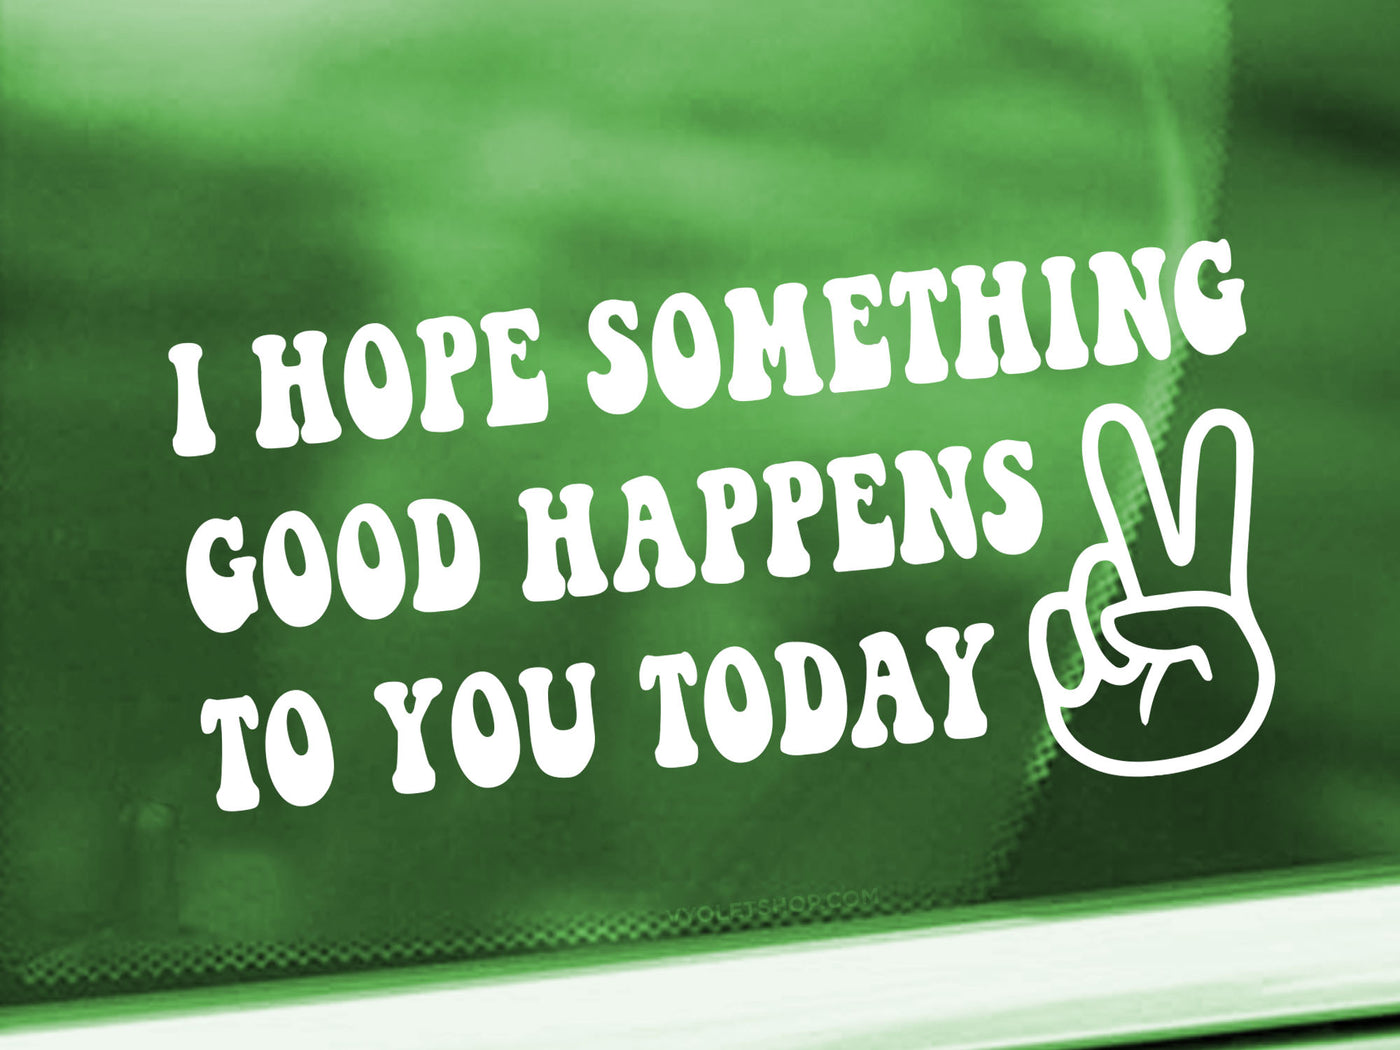 I Hope Something Good Happens To You Today Inspirational Car Window Bumper Vinyl Decal Sticker